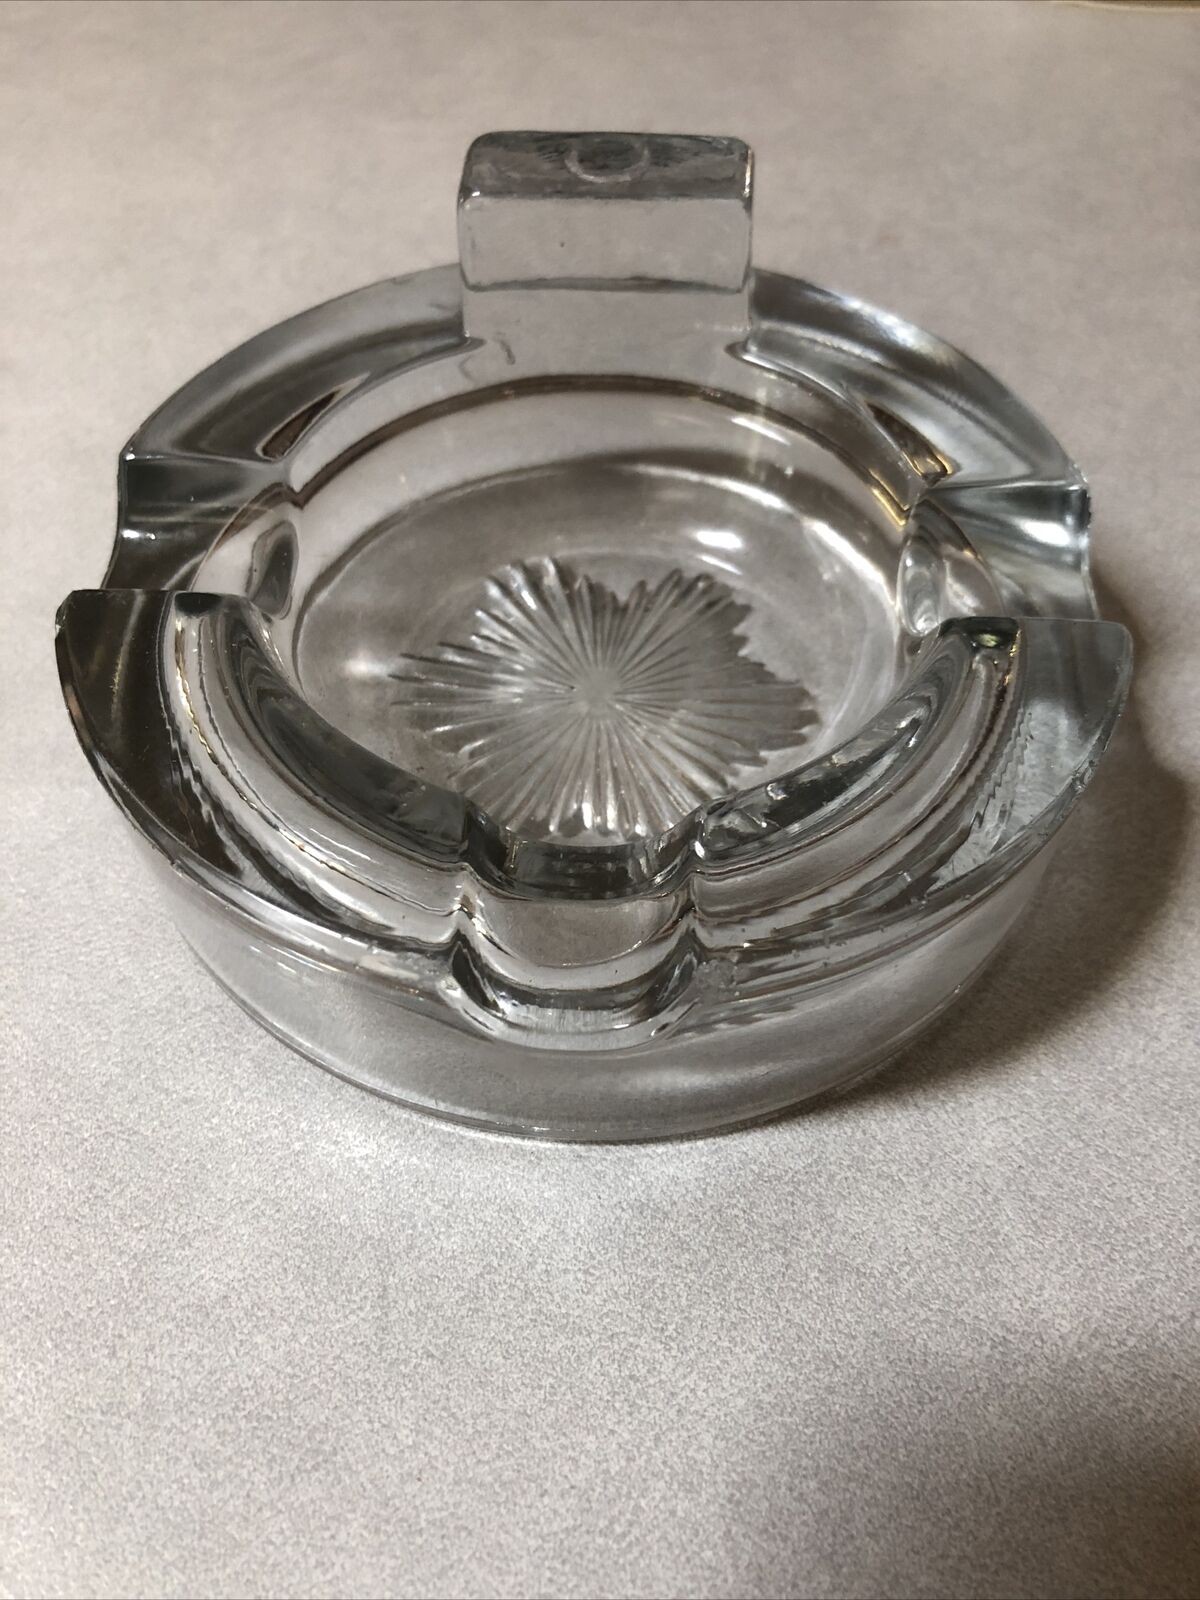 Vintage Clear Glass Ashtray with Match Holder Made for Ashtray Stand. MINT COND